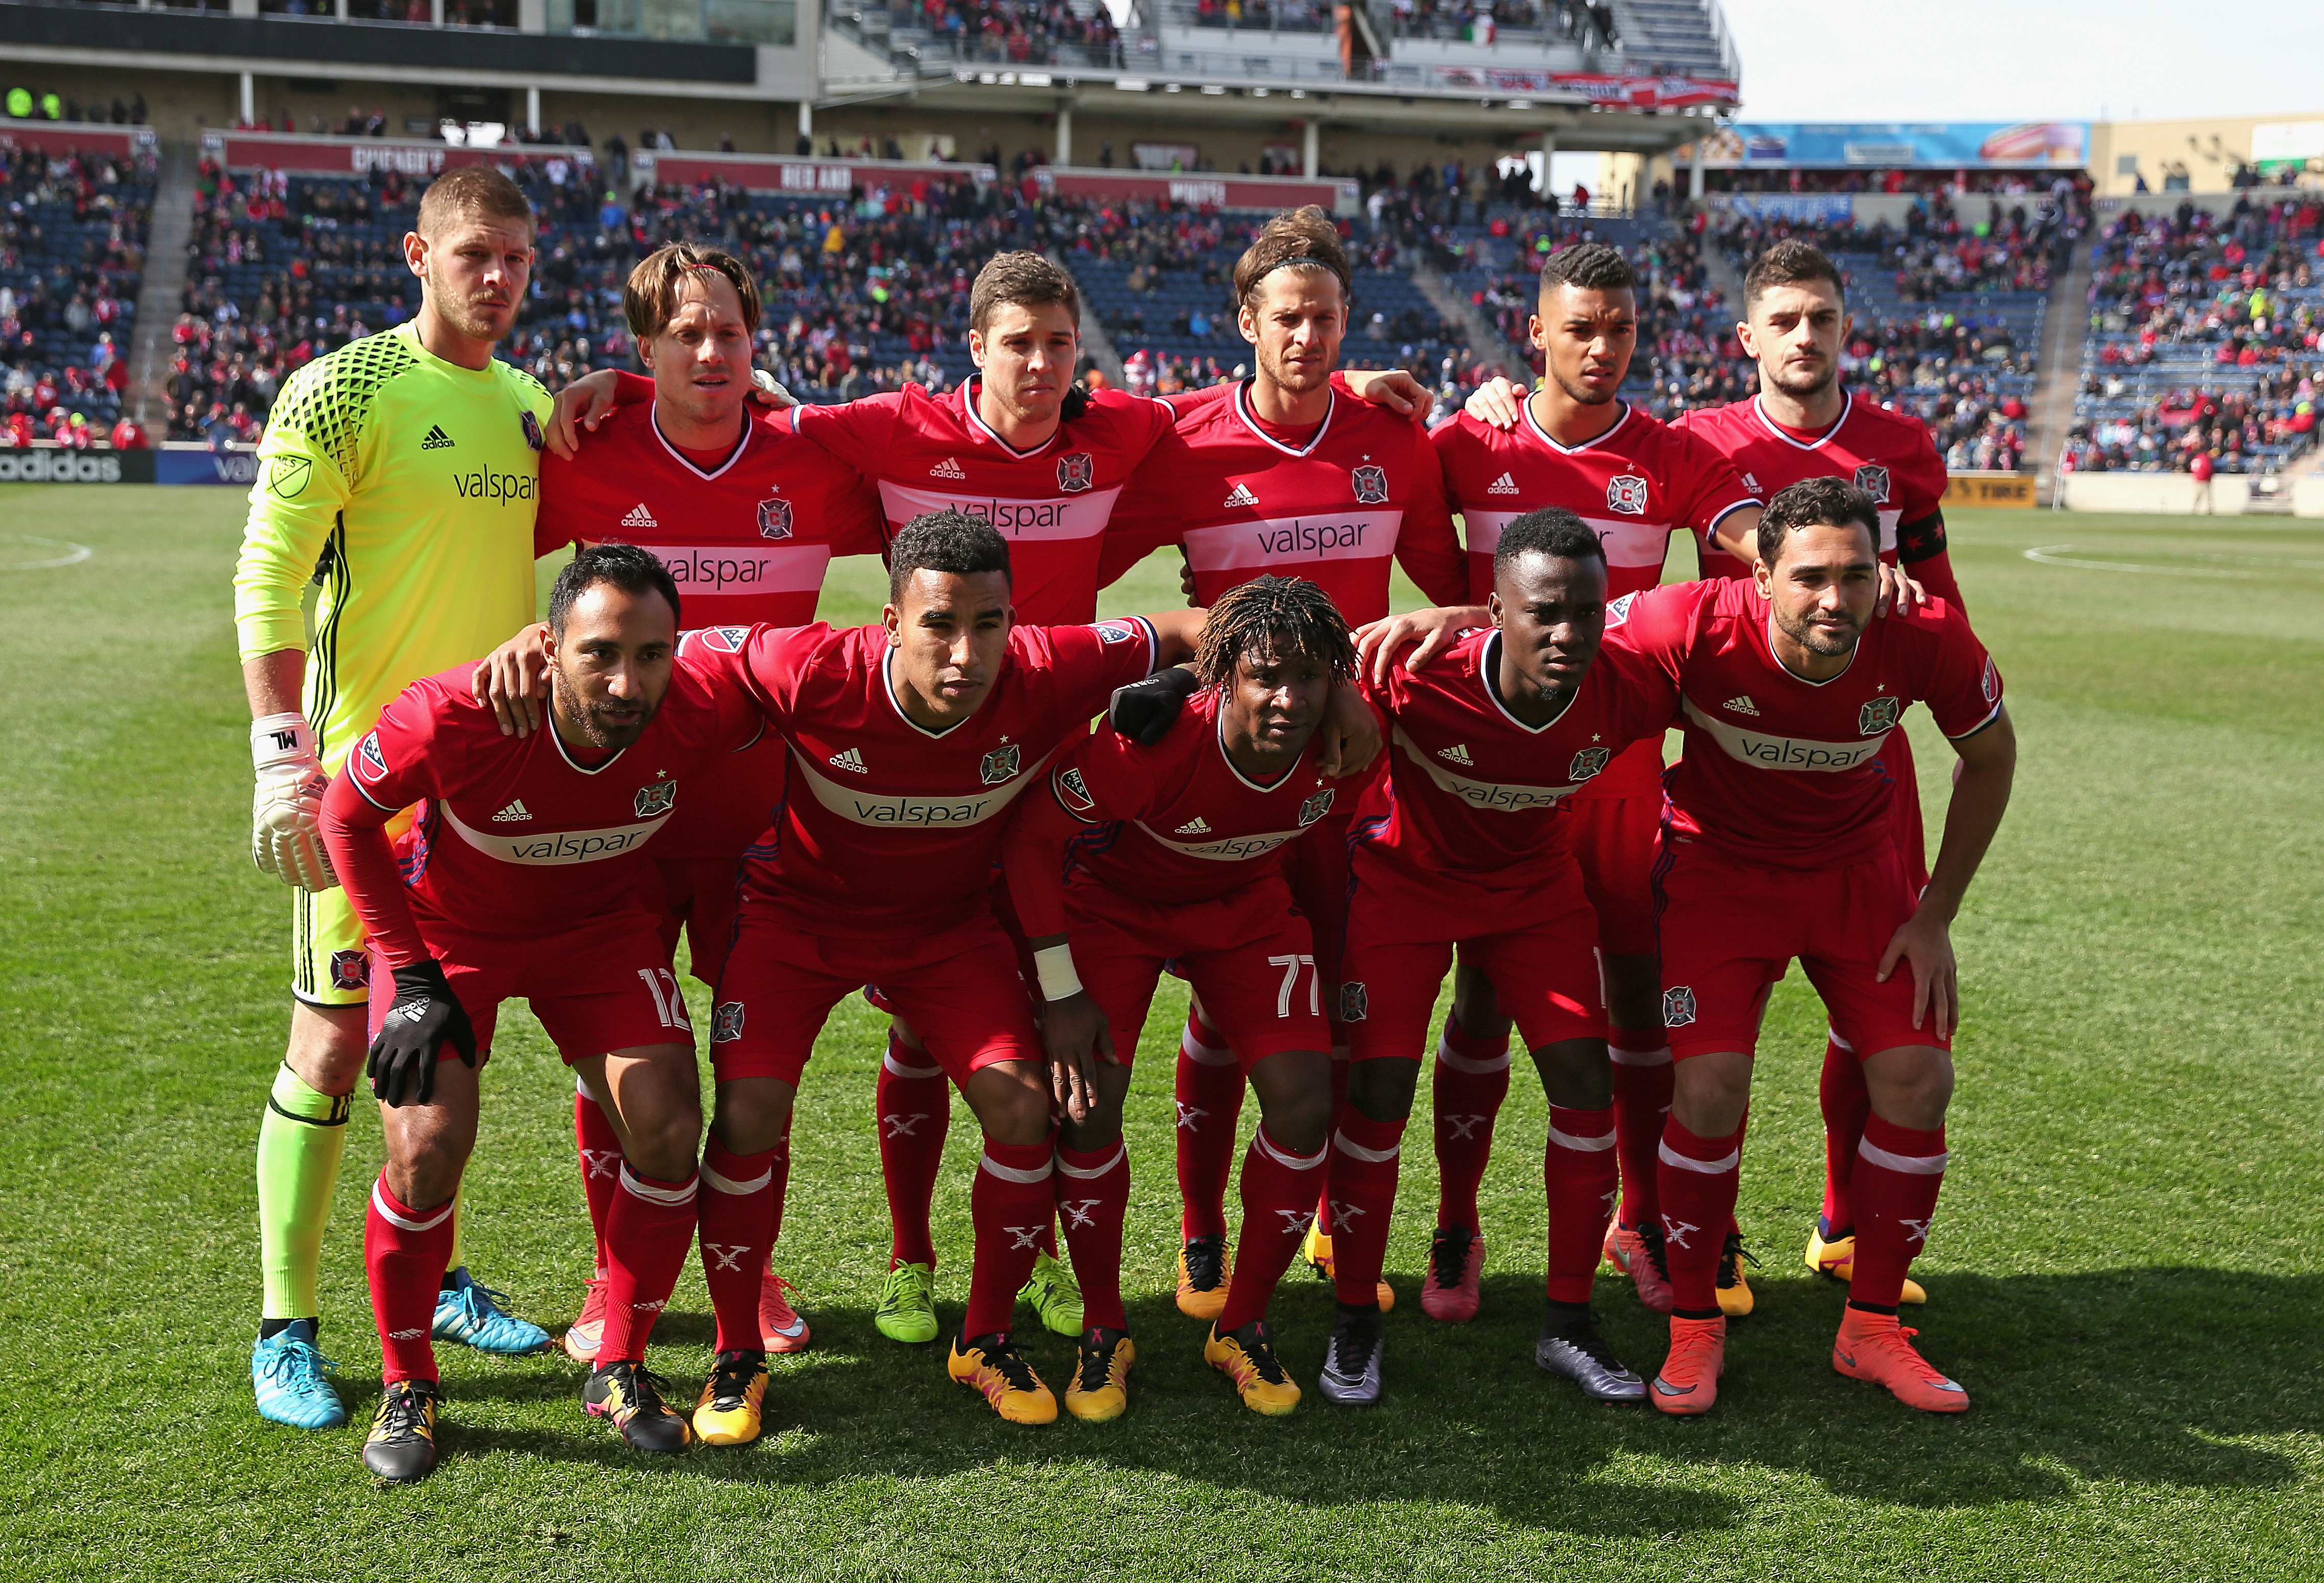 Chicago Fire’s defensive fluidity is remarkable